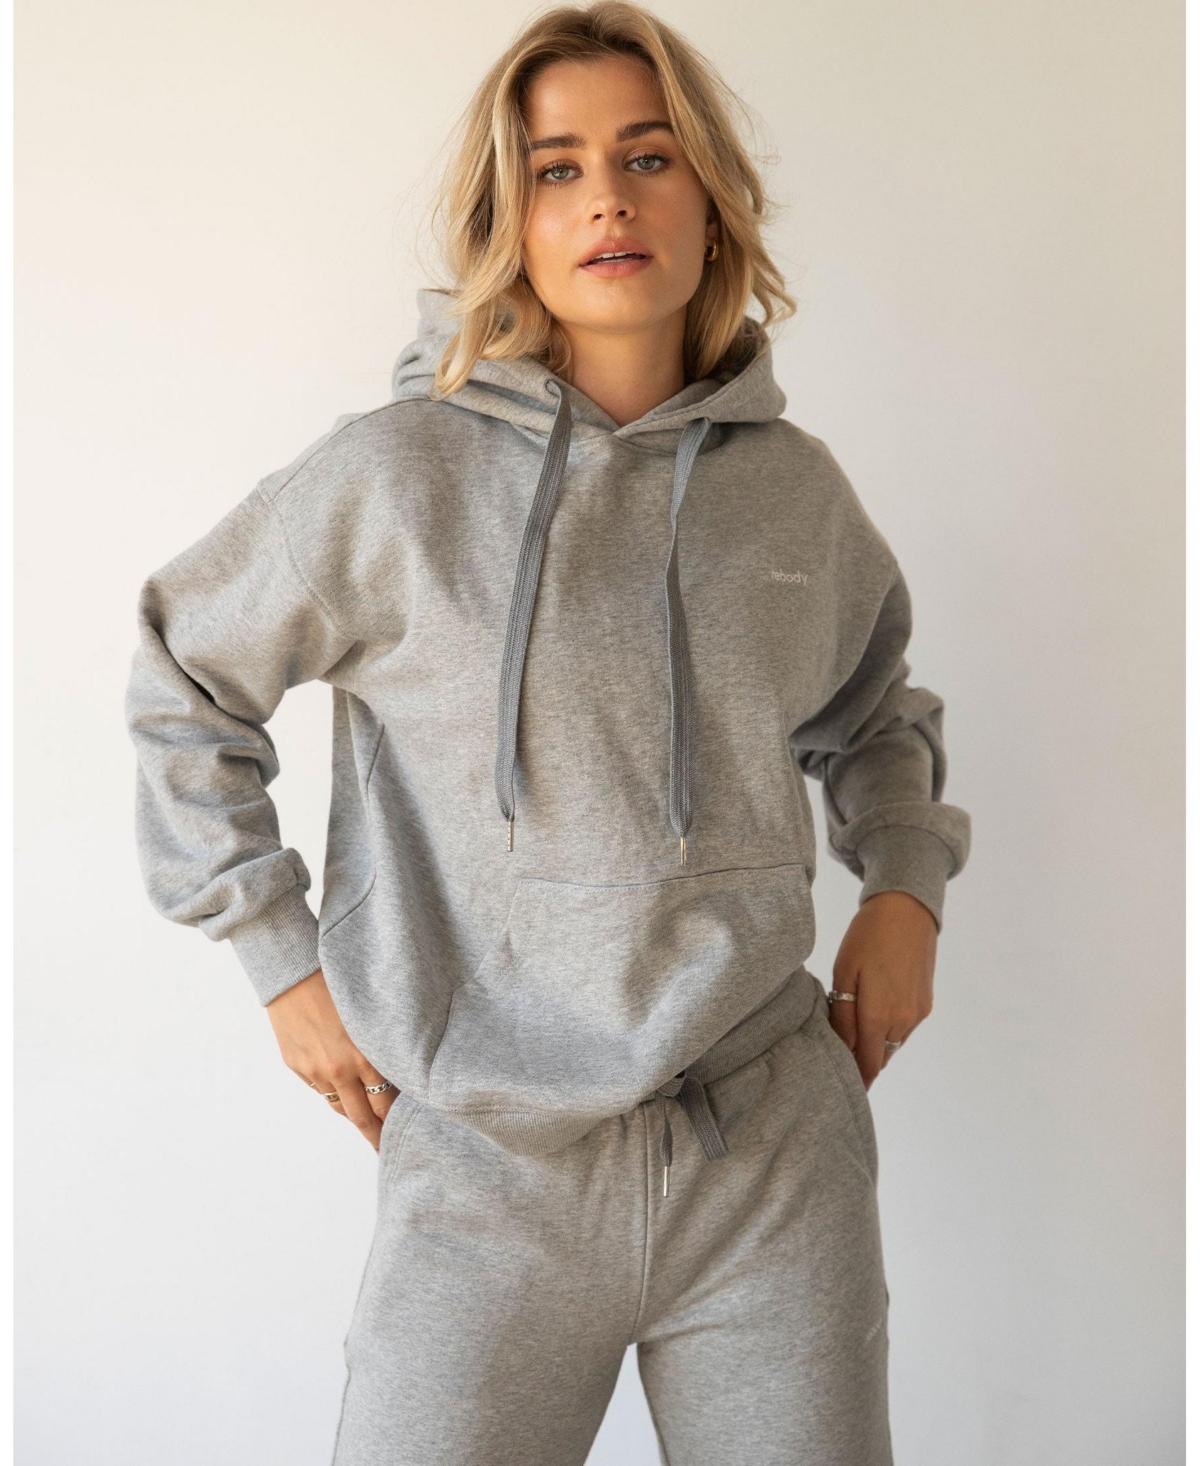  Rebody Lifestyle French Terry Hoodie for Women